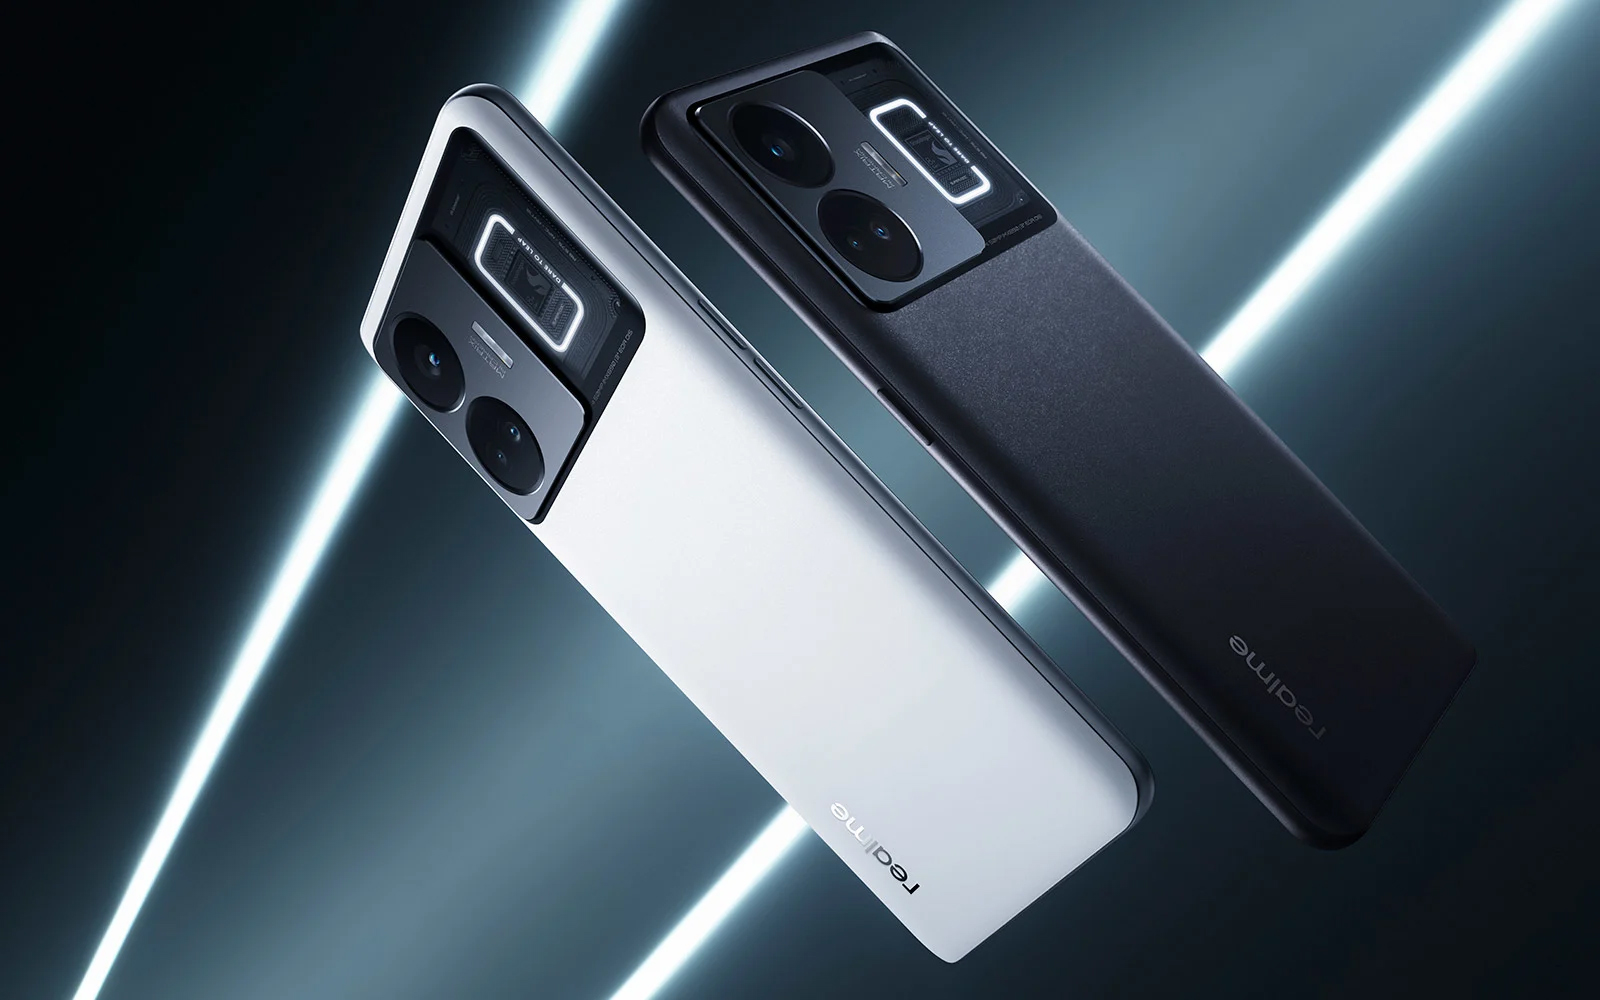 Realme GT 3 launched with 240W charging, 144Hz display, Snapdragon 8+ Gen 1  SoC and more - India Today